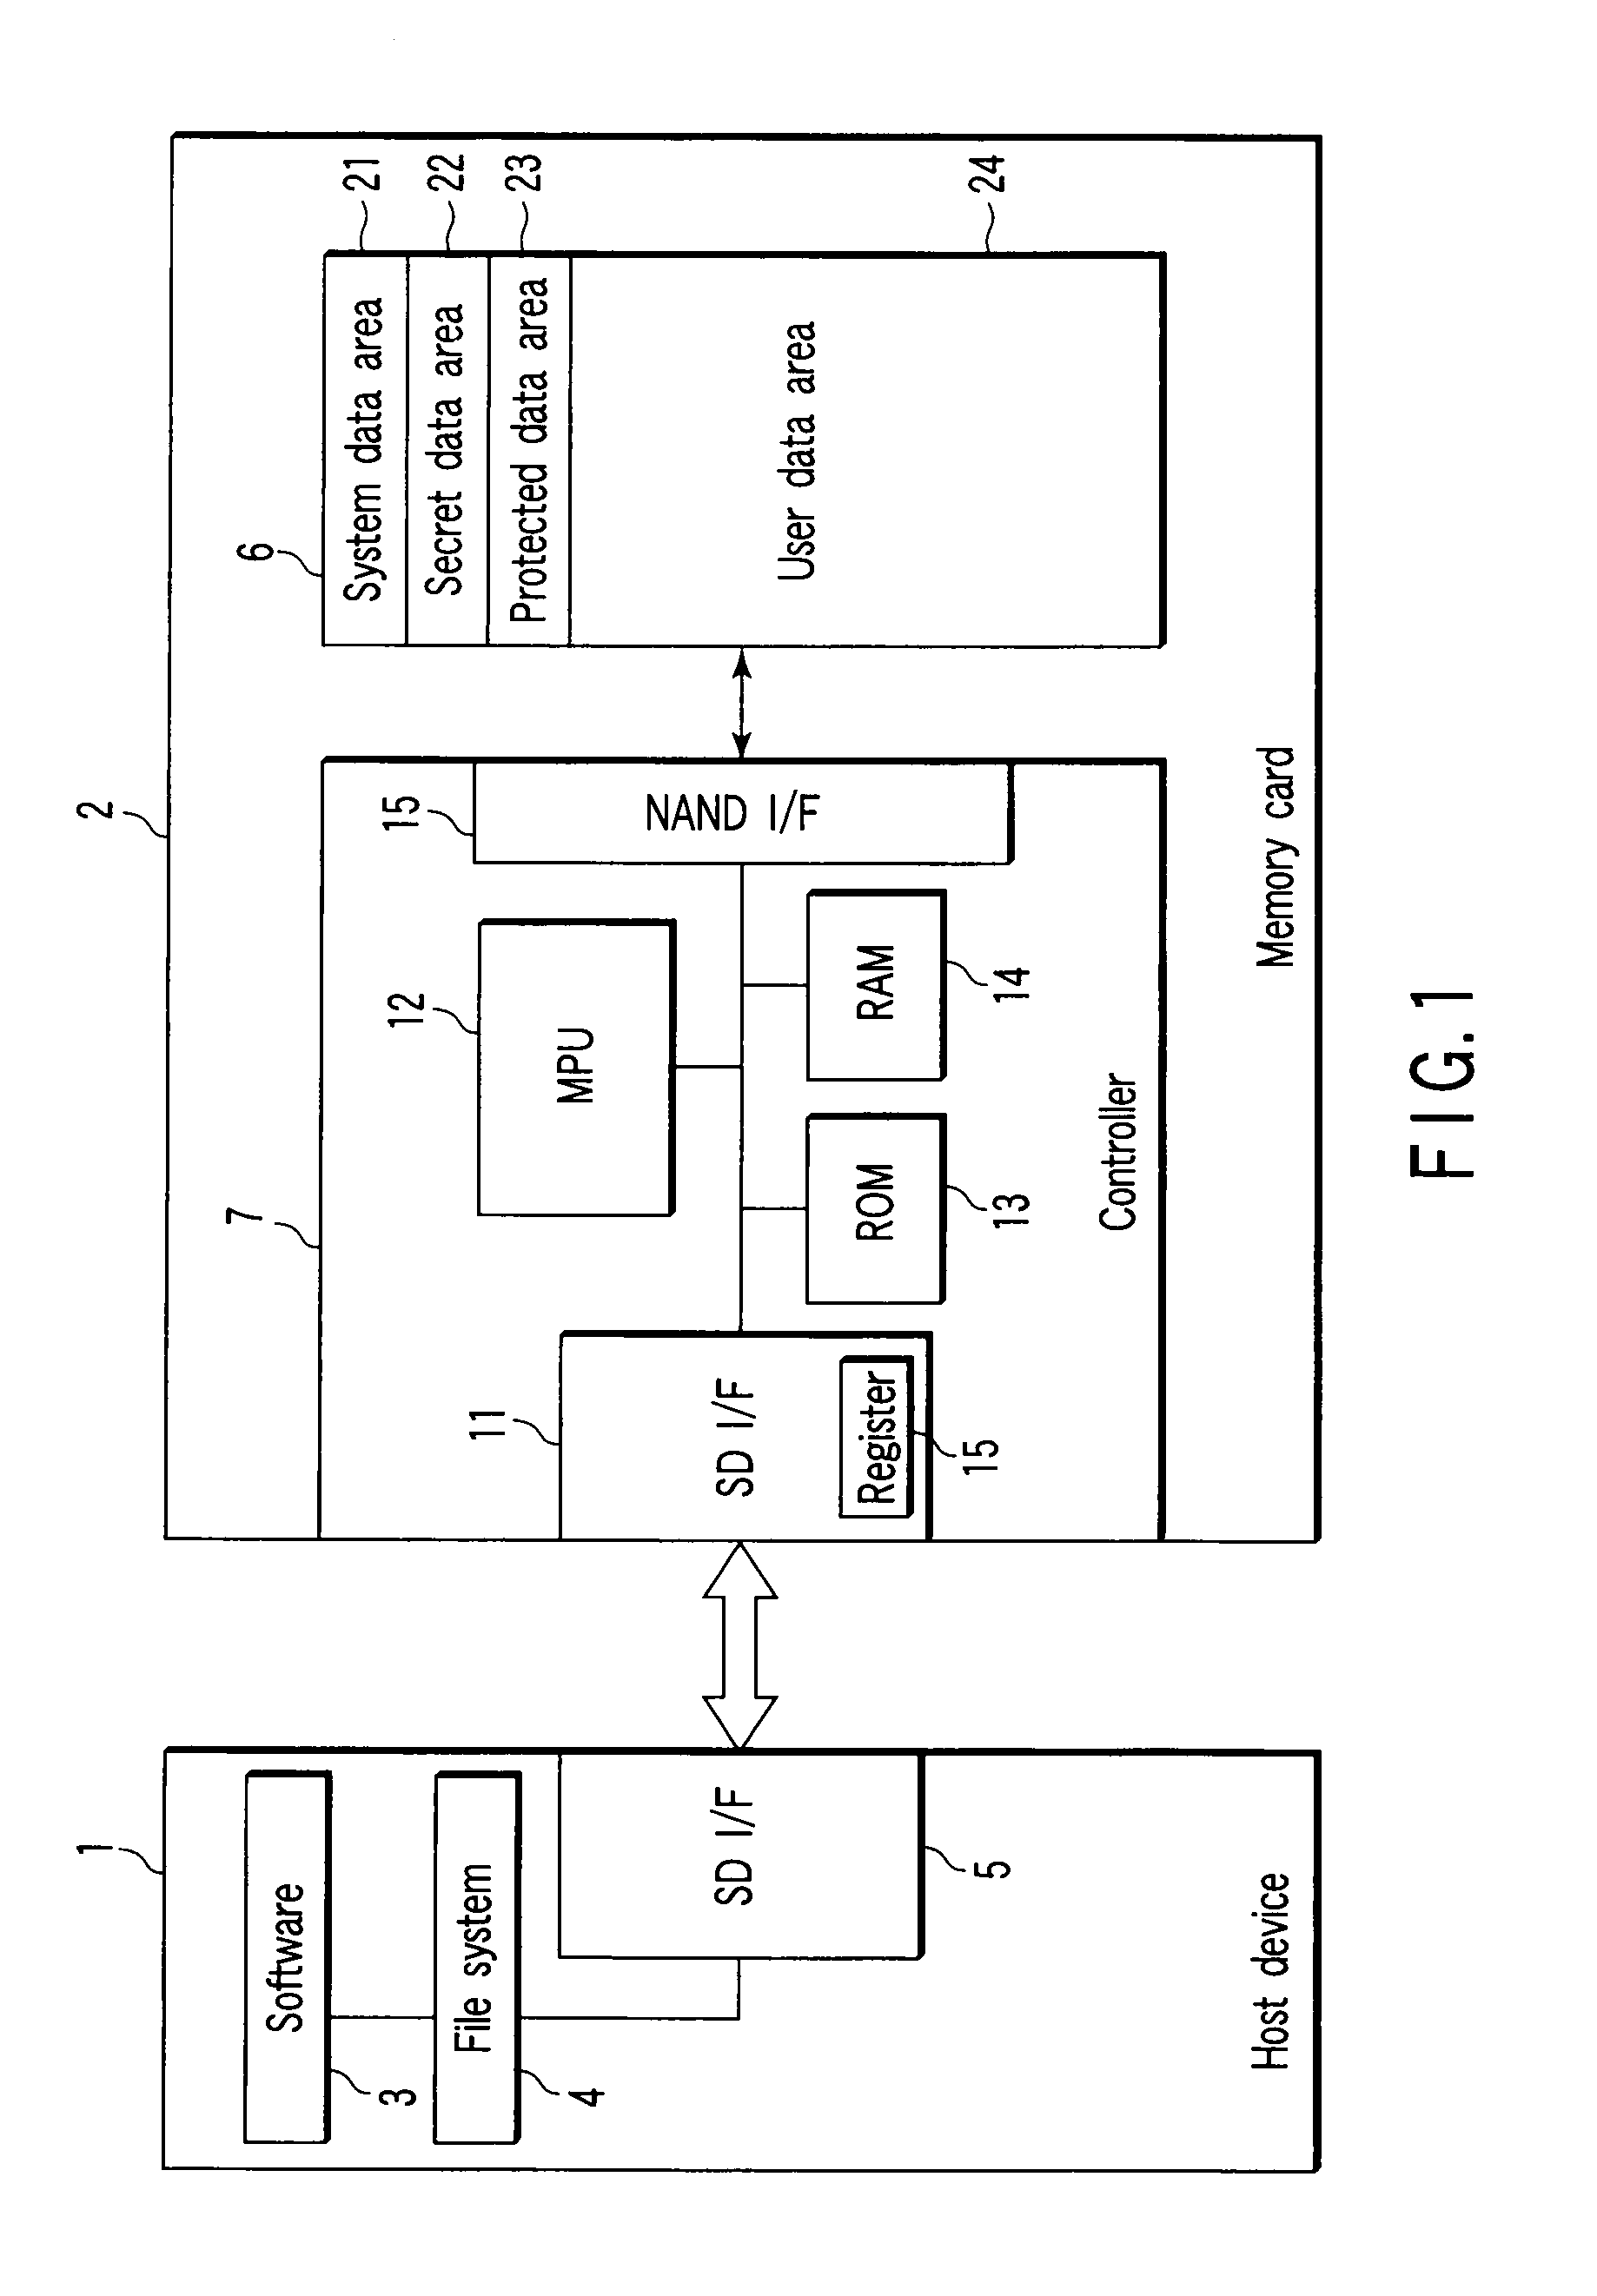 Host device and memory system